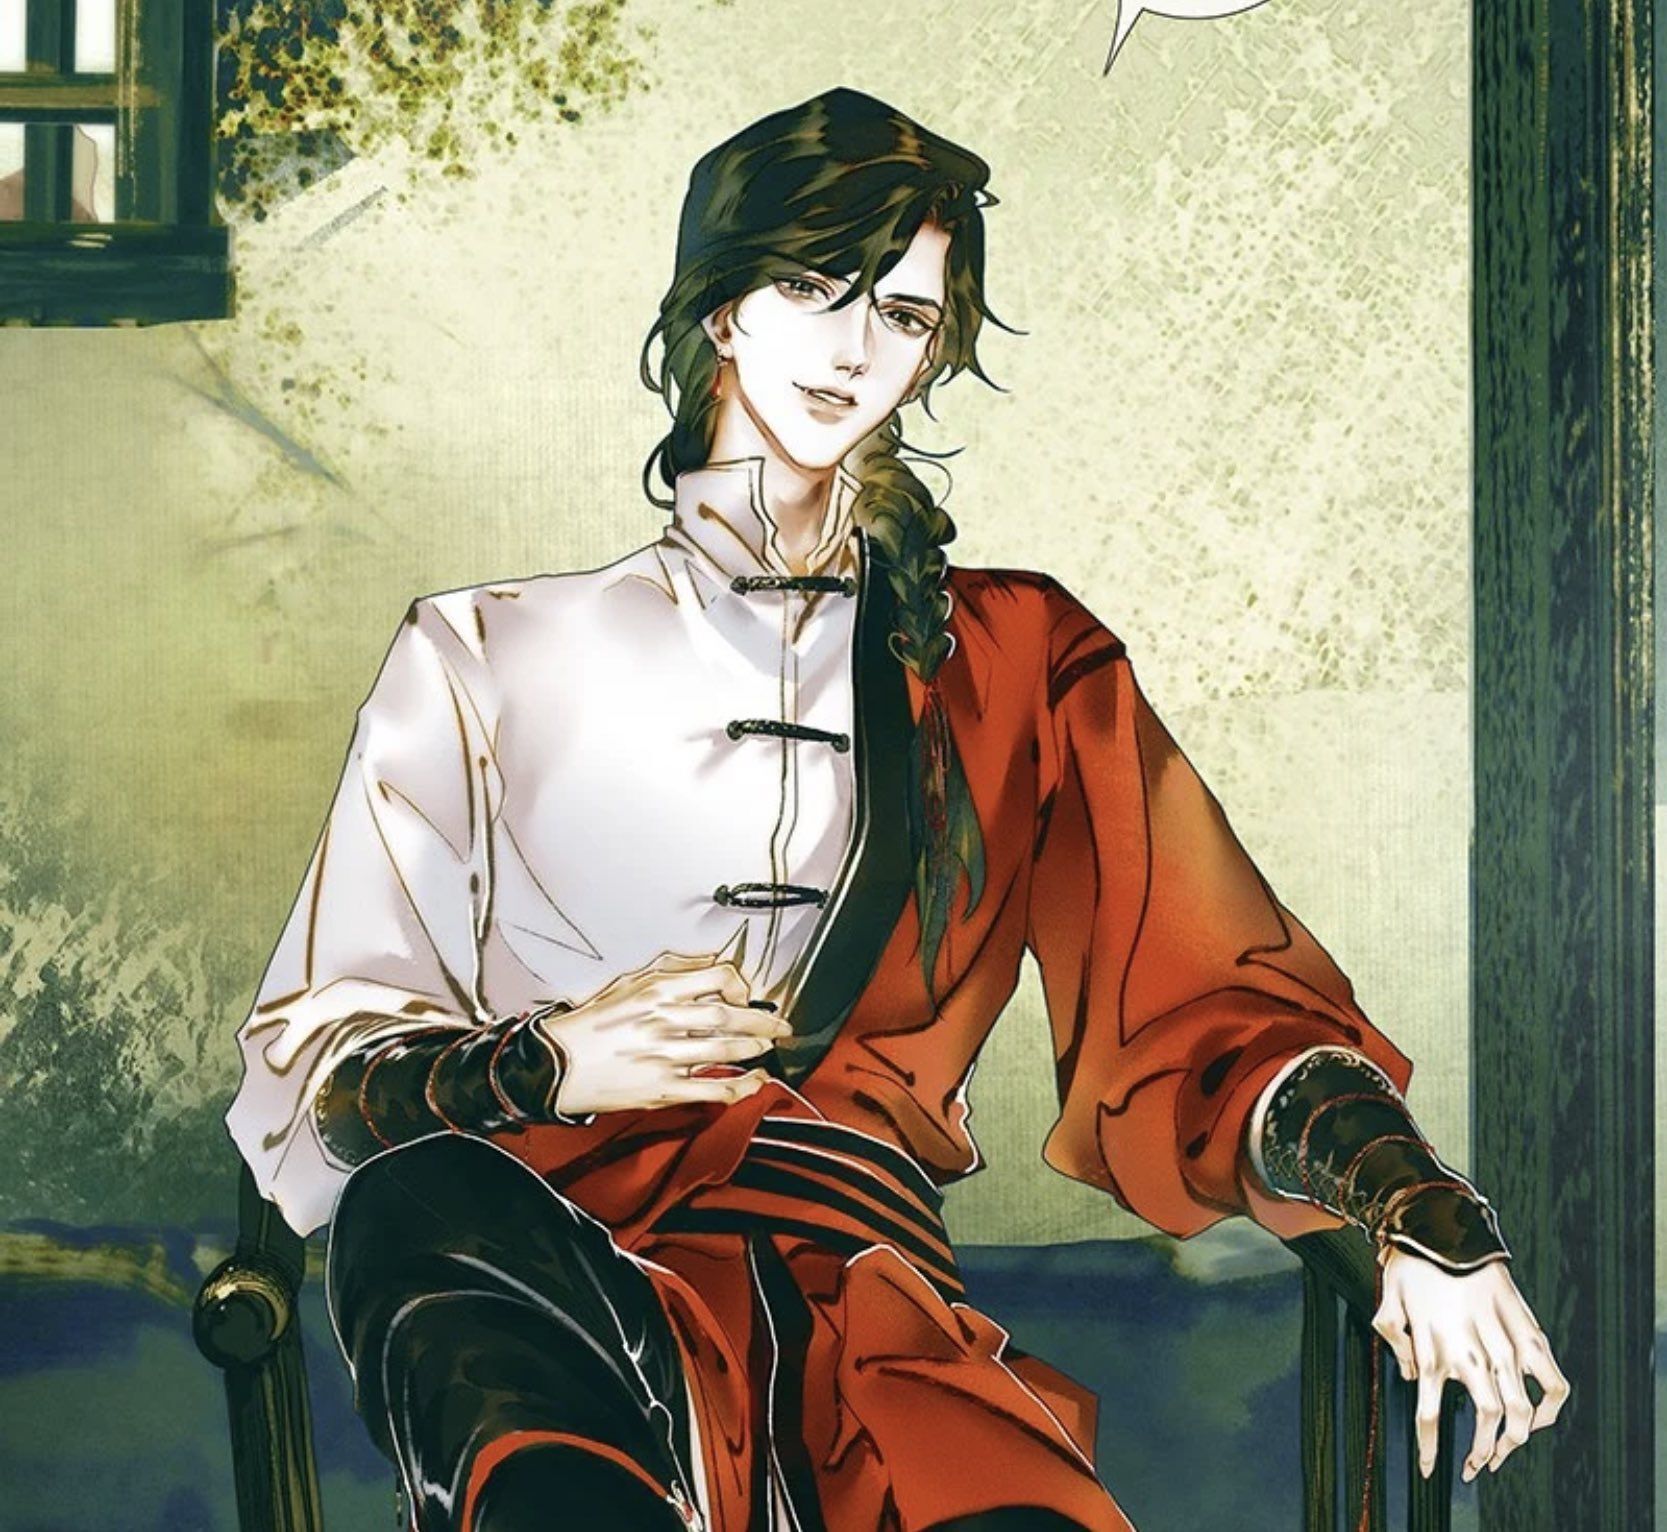 hua cheng sitting in hay